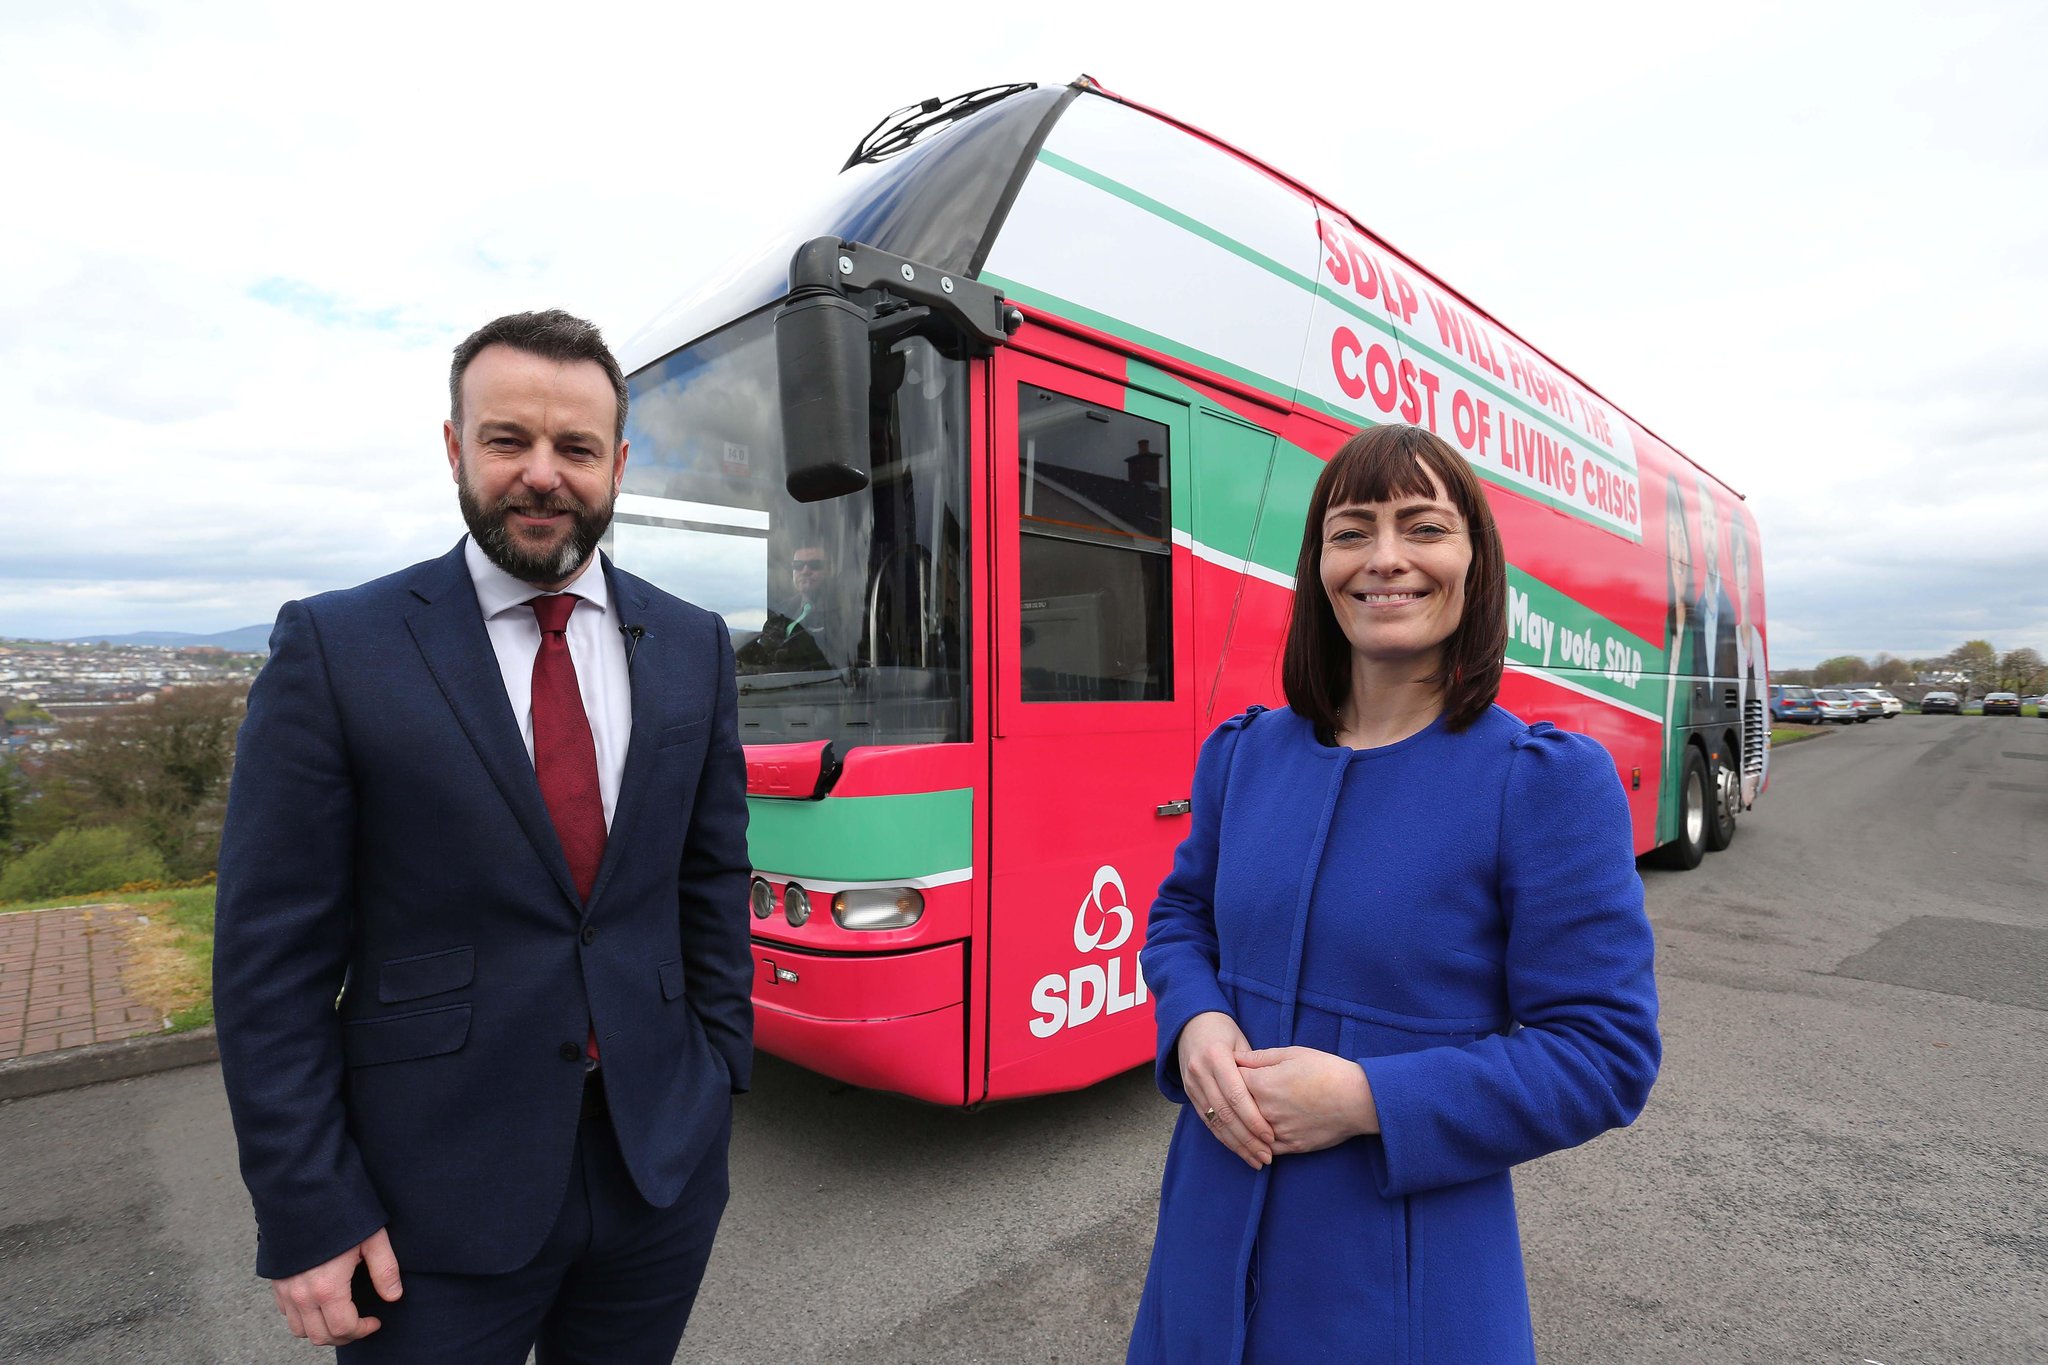 We won't be intimidated, vows SDLP leader Colum Eastwood